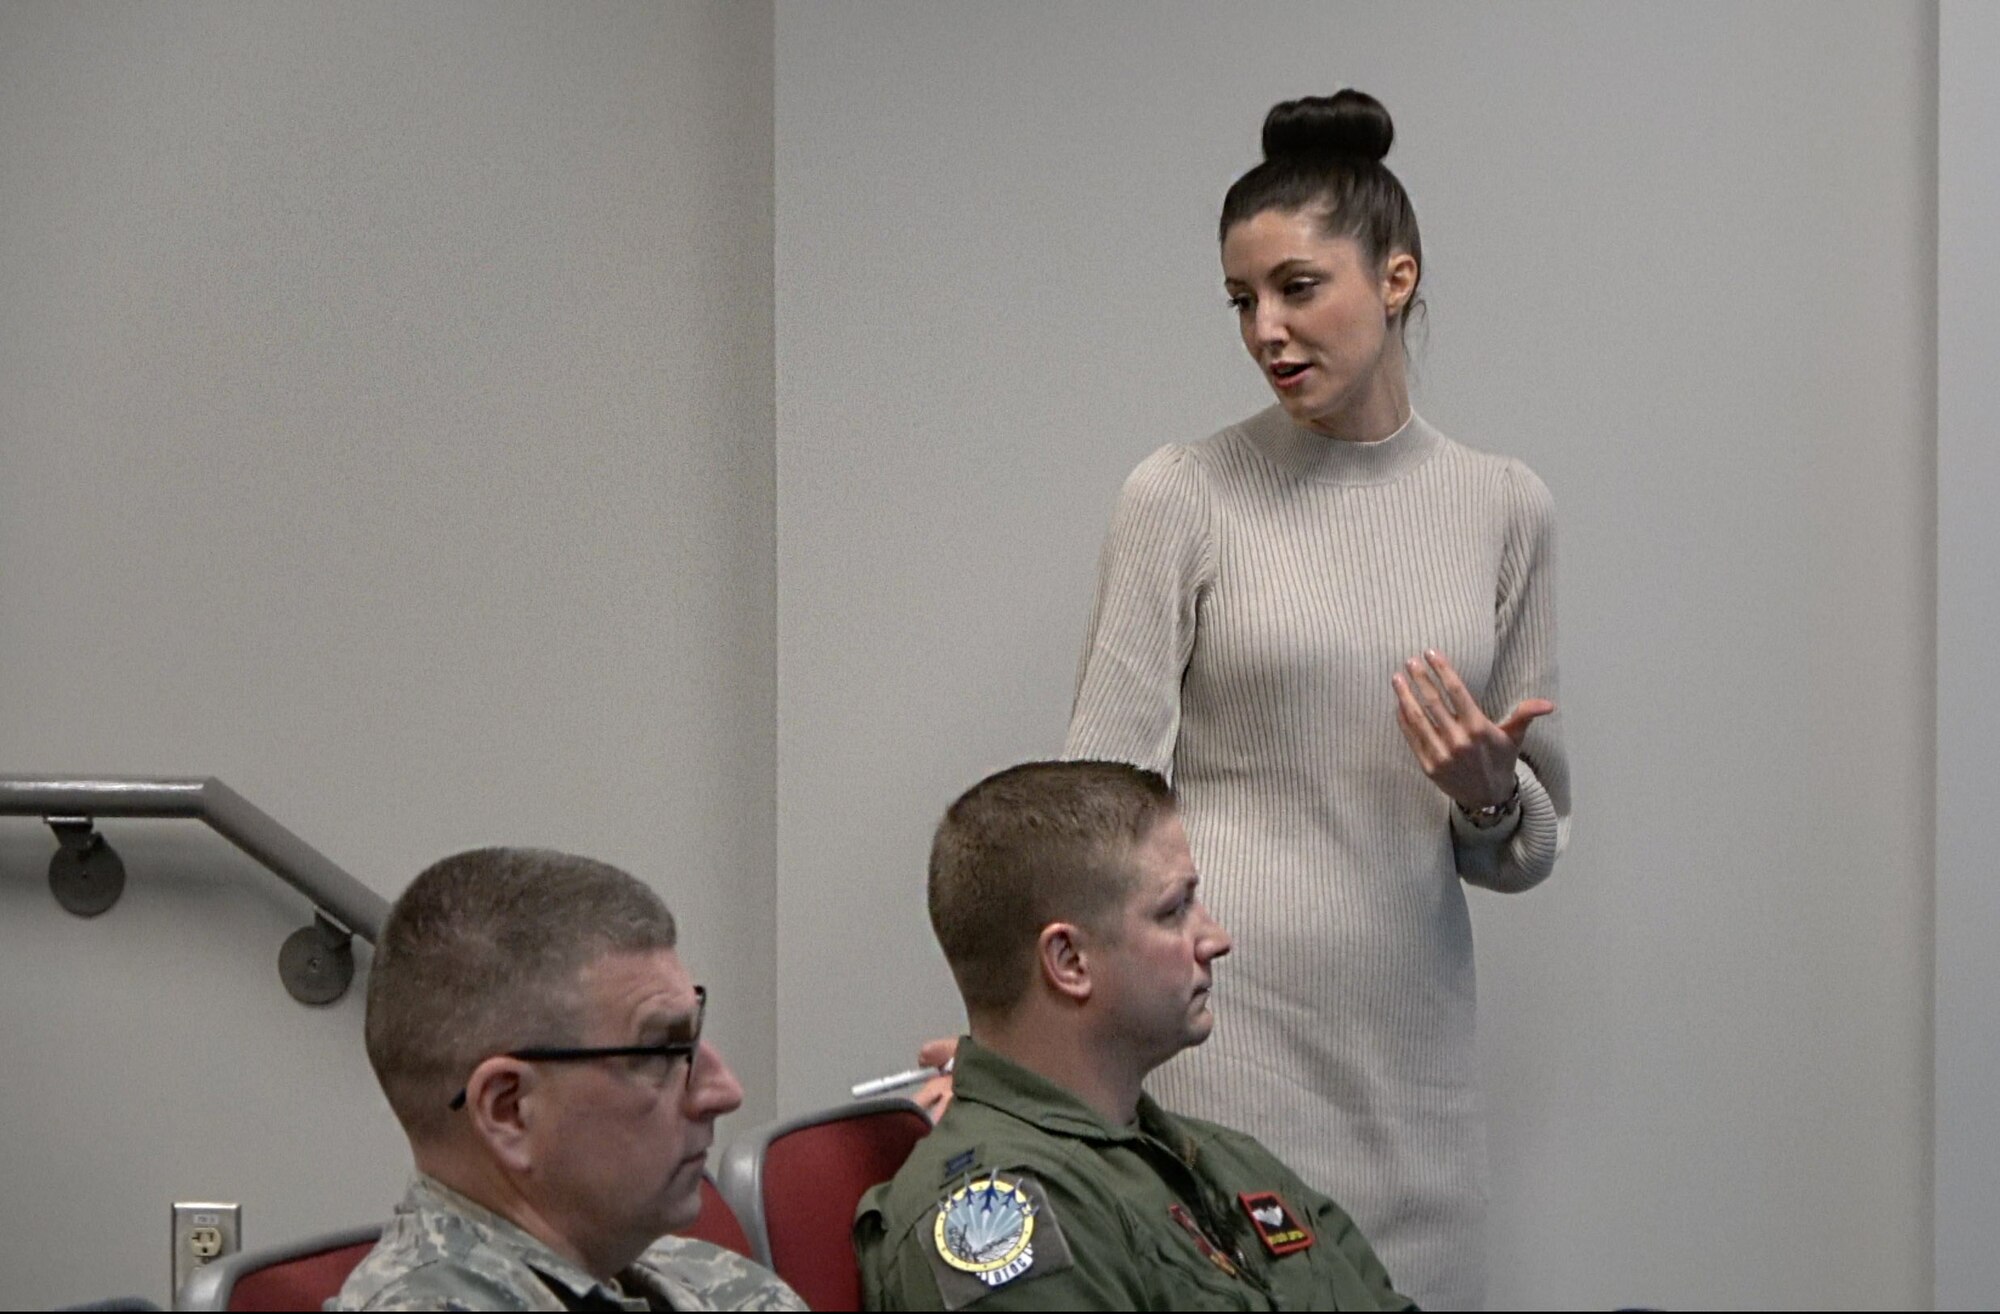 Clare Long, 132d Wing Airmen and Family Readiness Program Manager and accredited financial counselor (AFC), talks to Airmen during financial briefings on February 8, 2020, at the 132d Wing, Des Moines, Iowa. Financial literacy is a key factor in ensuring Airmen maintain their security clearances. (Iowa Air National Guard Senior Airman Katelyn Sprott)